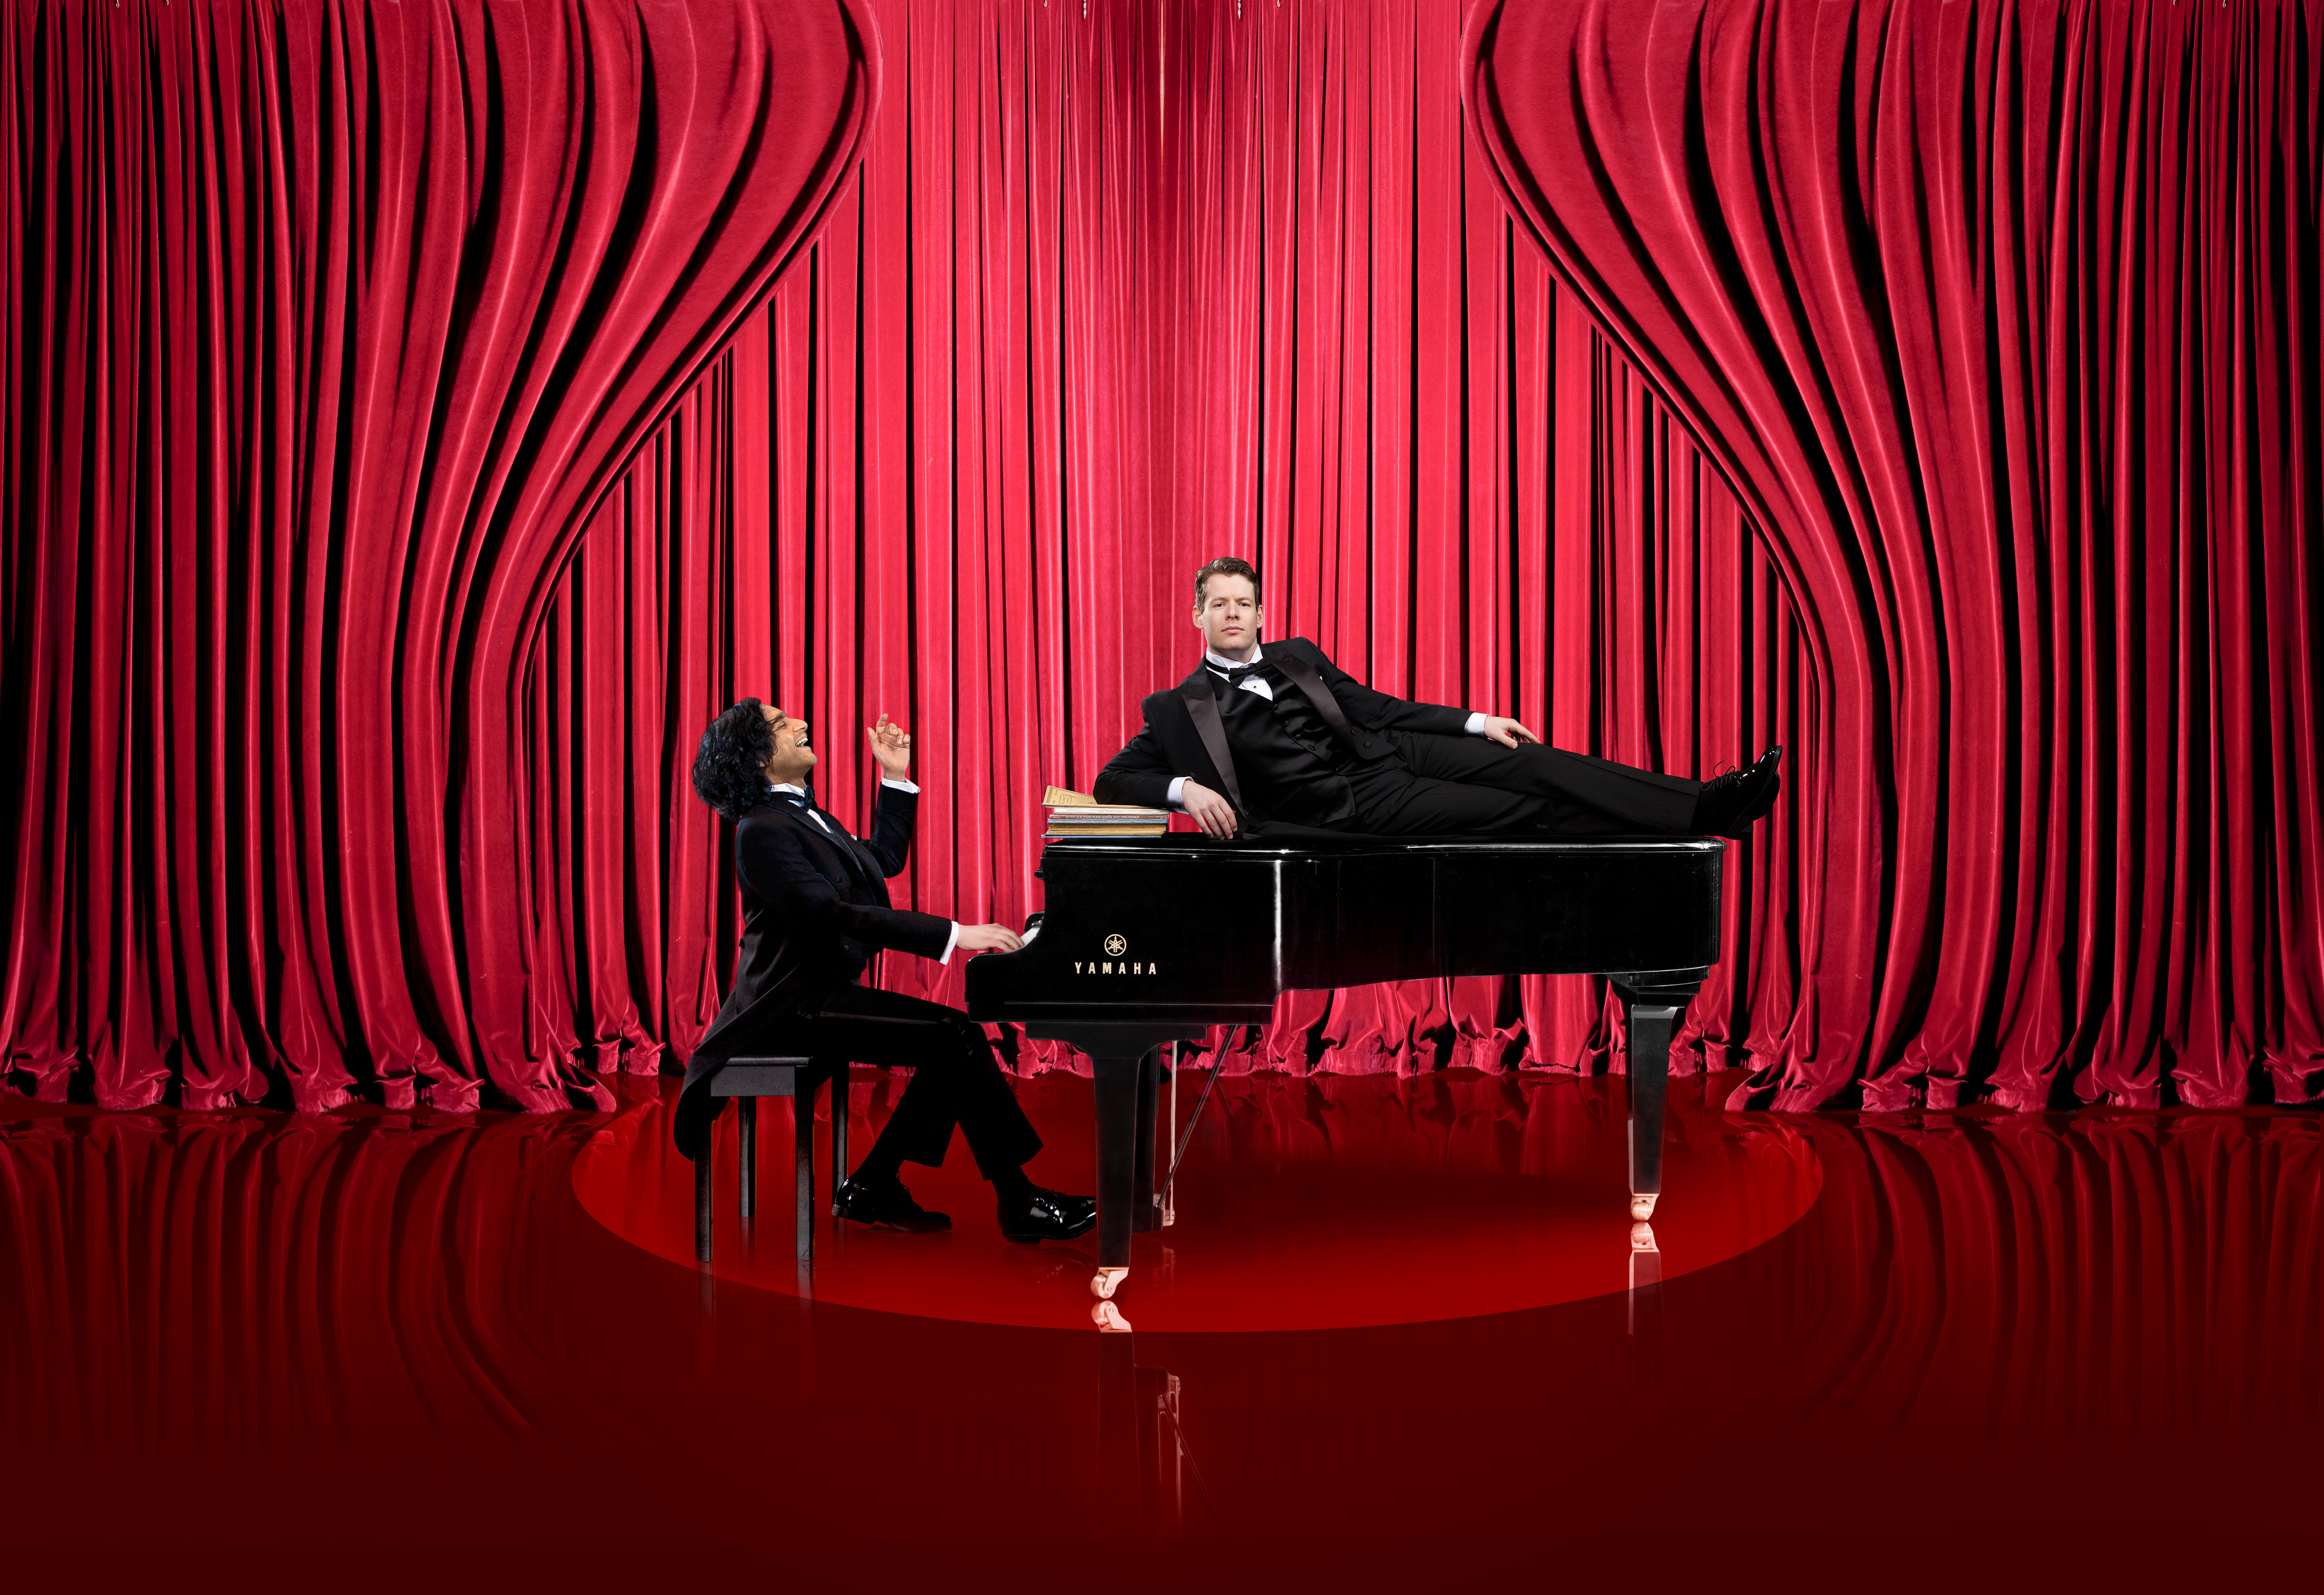 PAST EVENT: 2 Pianos 4 Hands – National Arts Centre (Ottawa, ON) July 18 – August 3, 2019